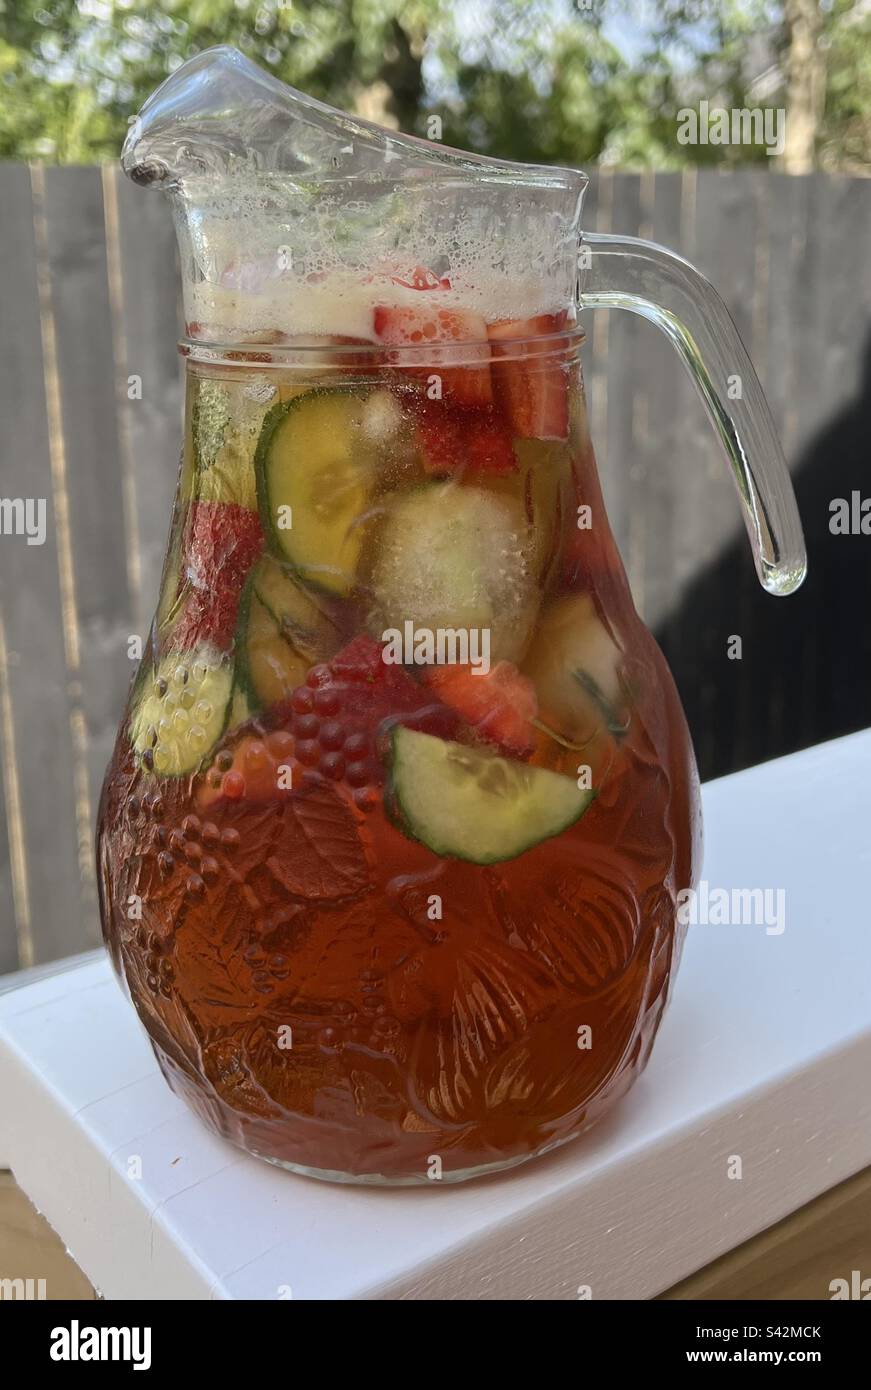 Jug of pimms, summers day, summertime, fresh iced drink Stock Photo